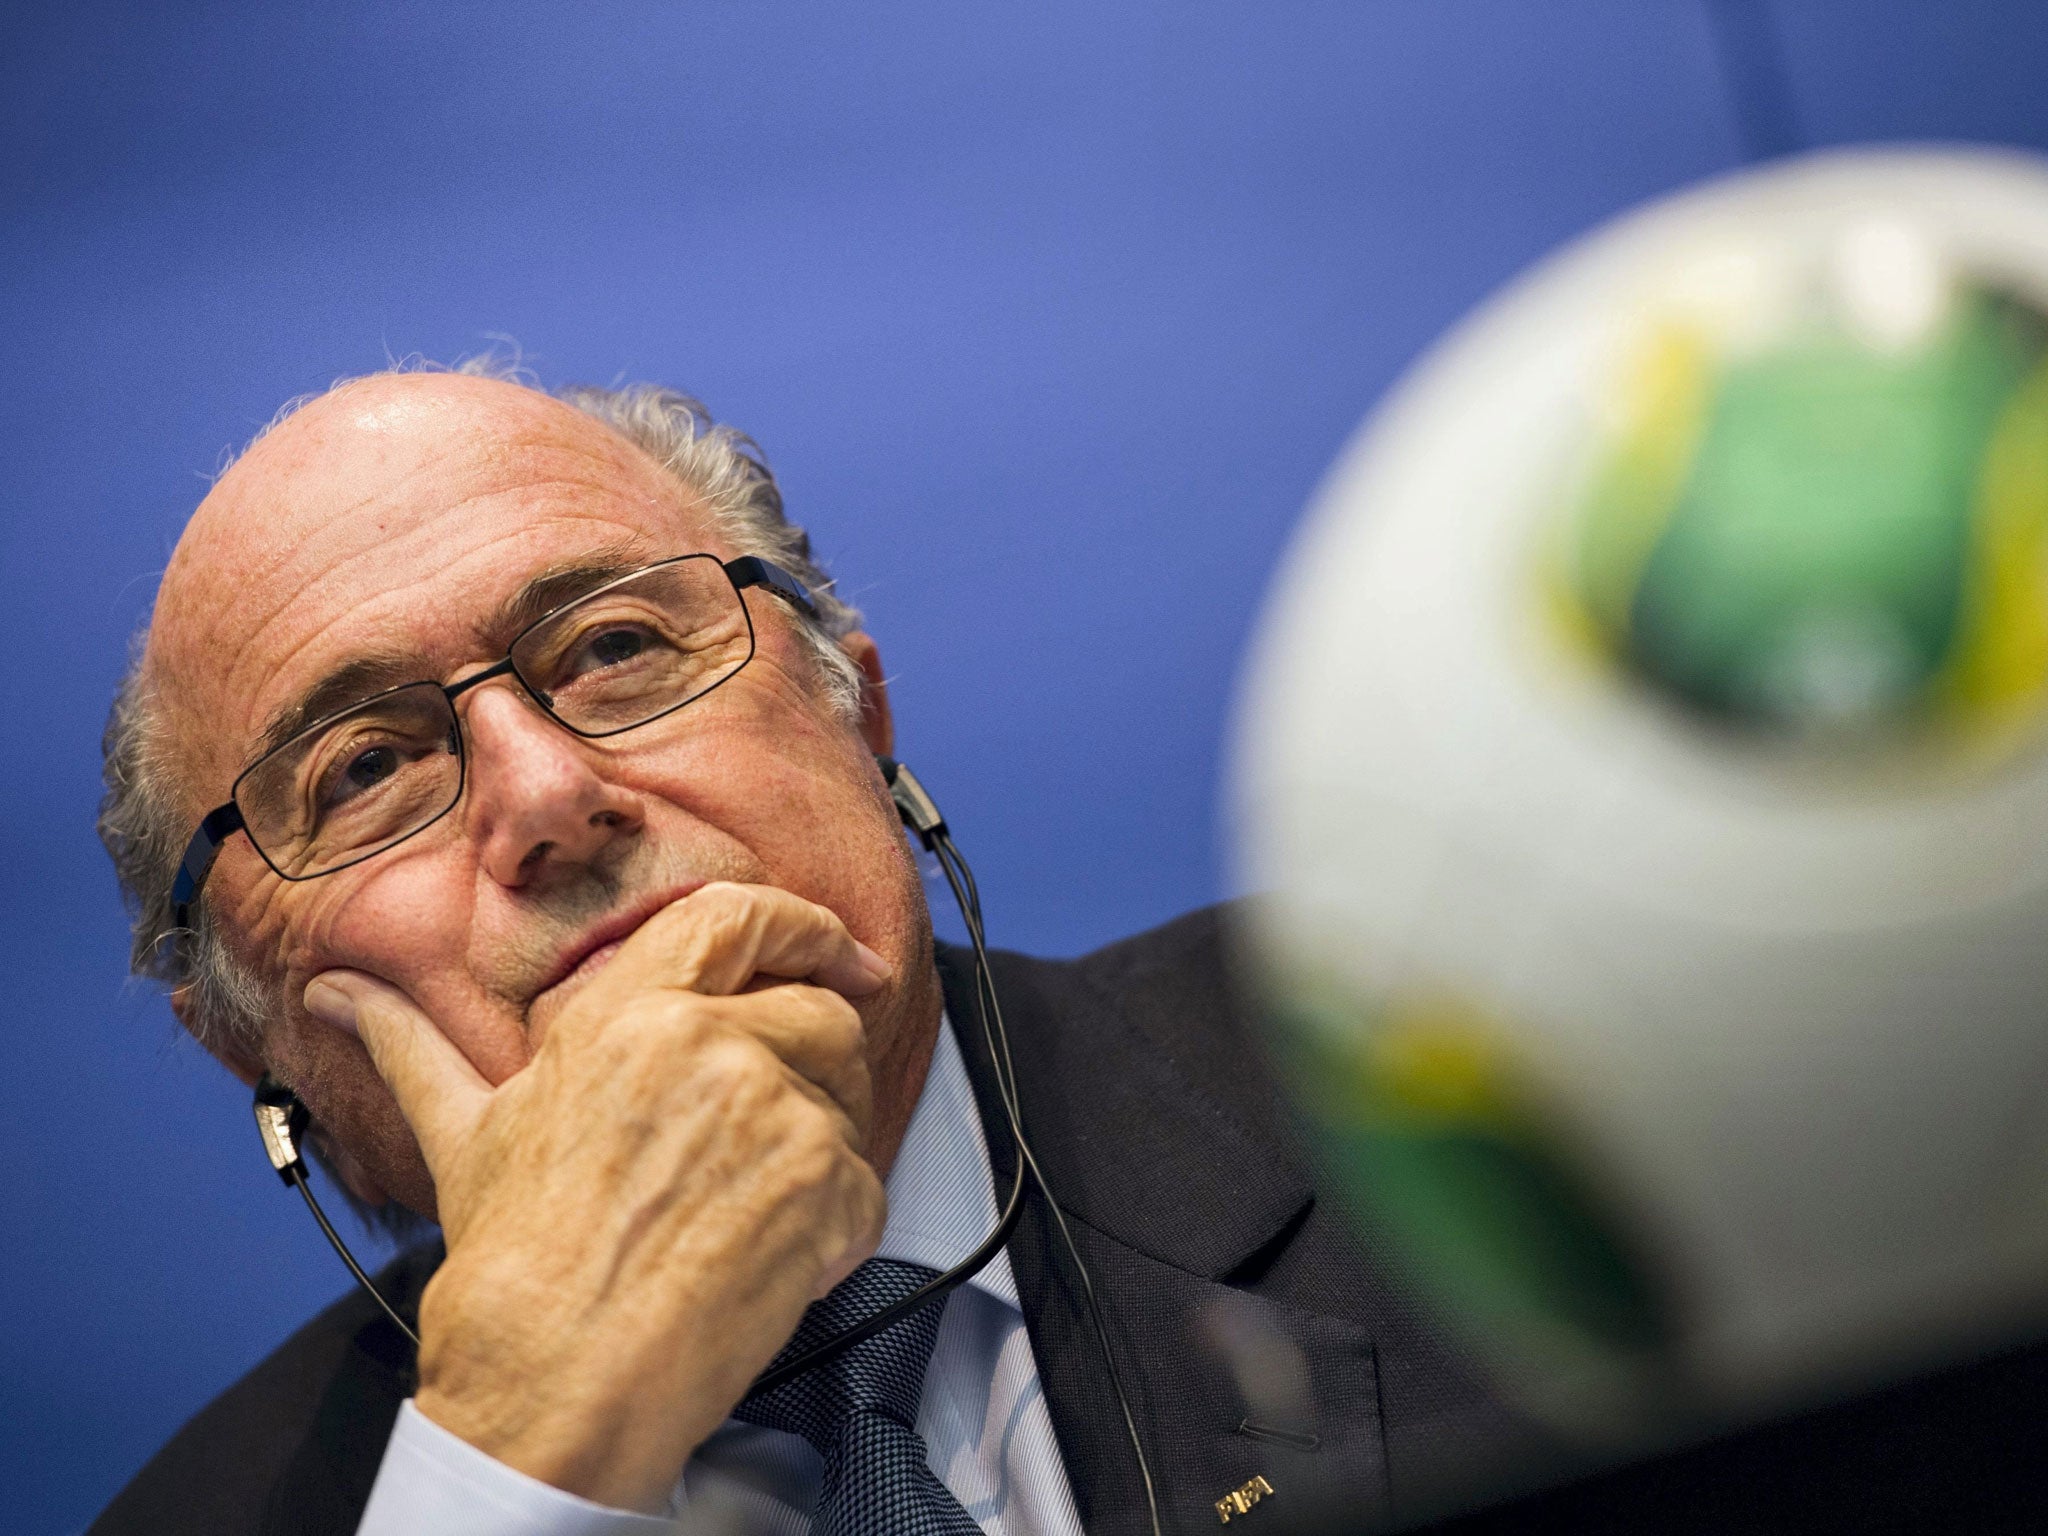 Fifa president Sepp Blatter listens to questions in Zurich